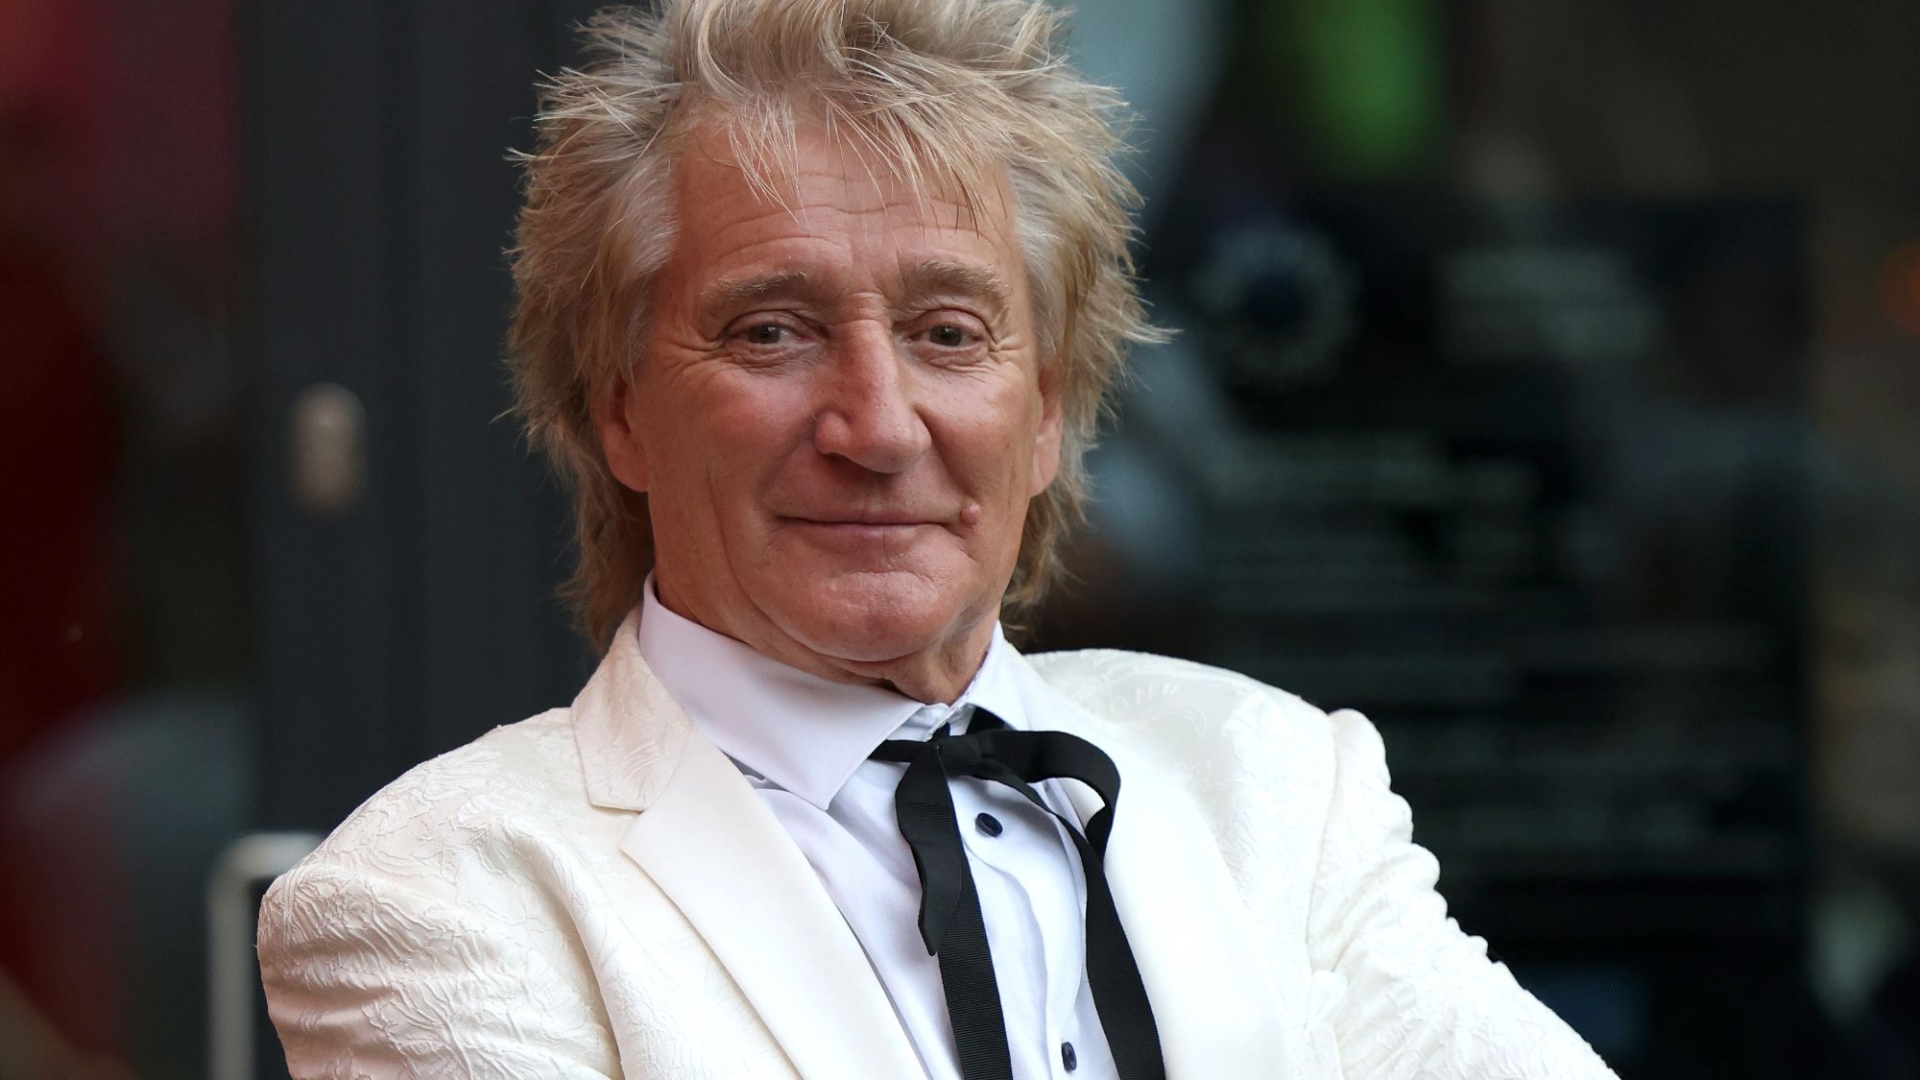 Sir Rod Stewart wins the fight to get roads repaved after potholes complaints